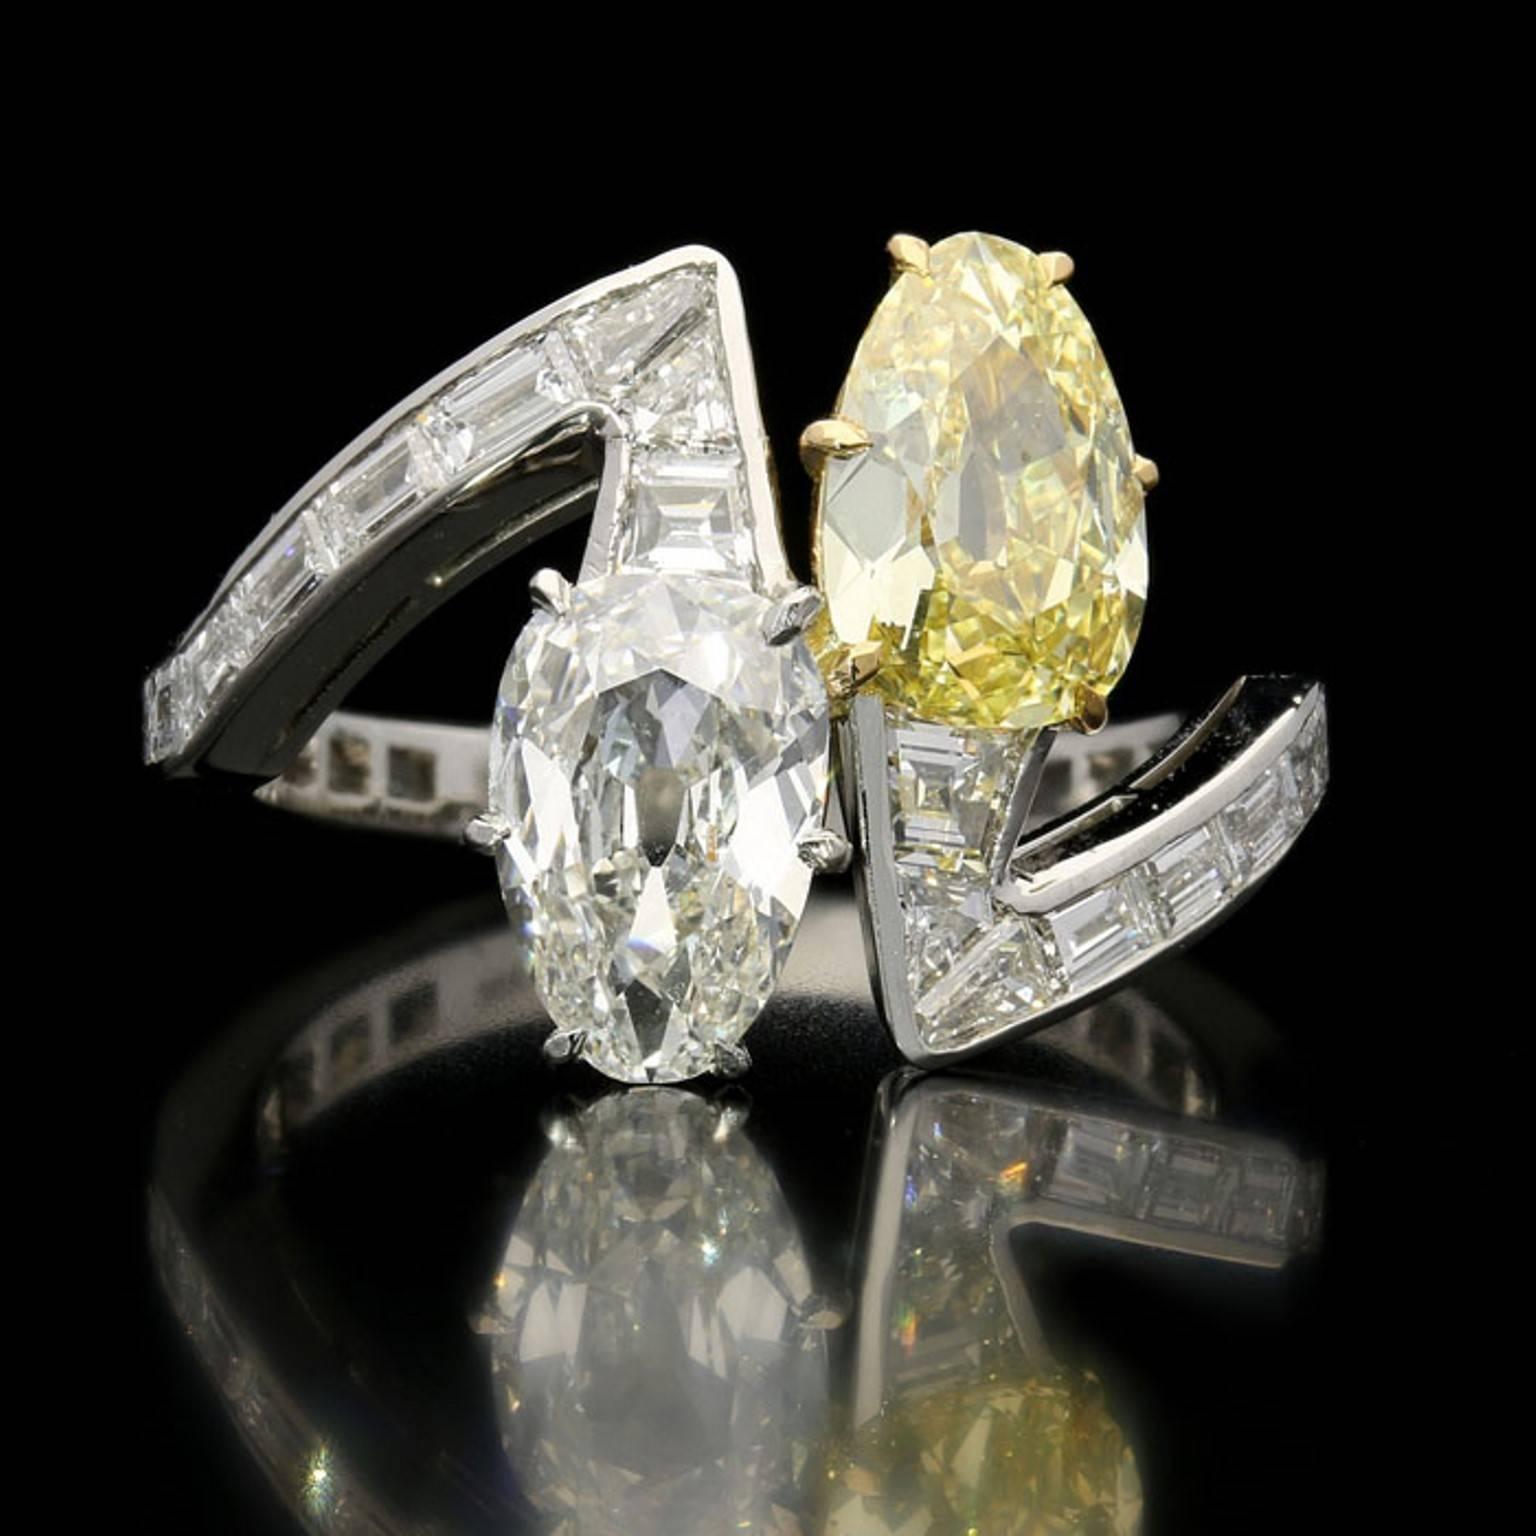 The wonderfully stylish contemporary ring set with an unusual pair of old cut pear shaped diamonds, a 1.01ct Fancy Intense yellow and a 1.03ct H VS2, claw set and facing in opposite directions along the finger, each to the head of an angular row of